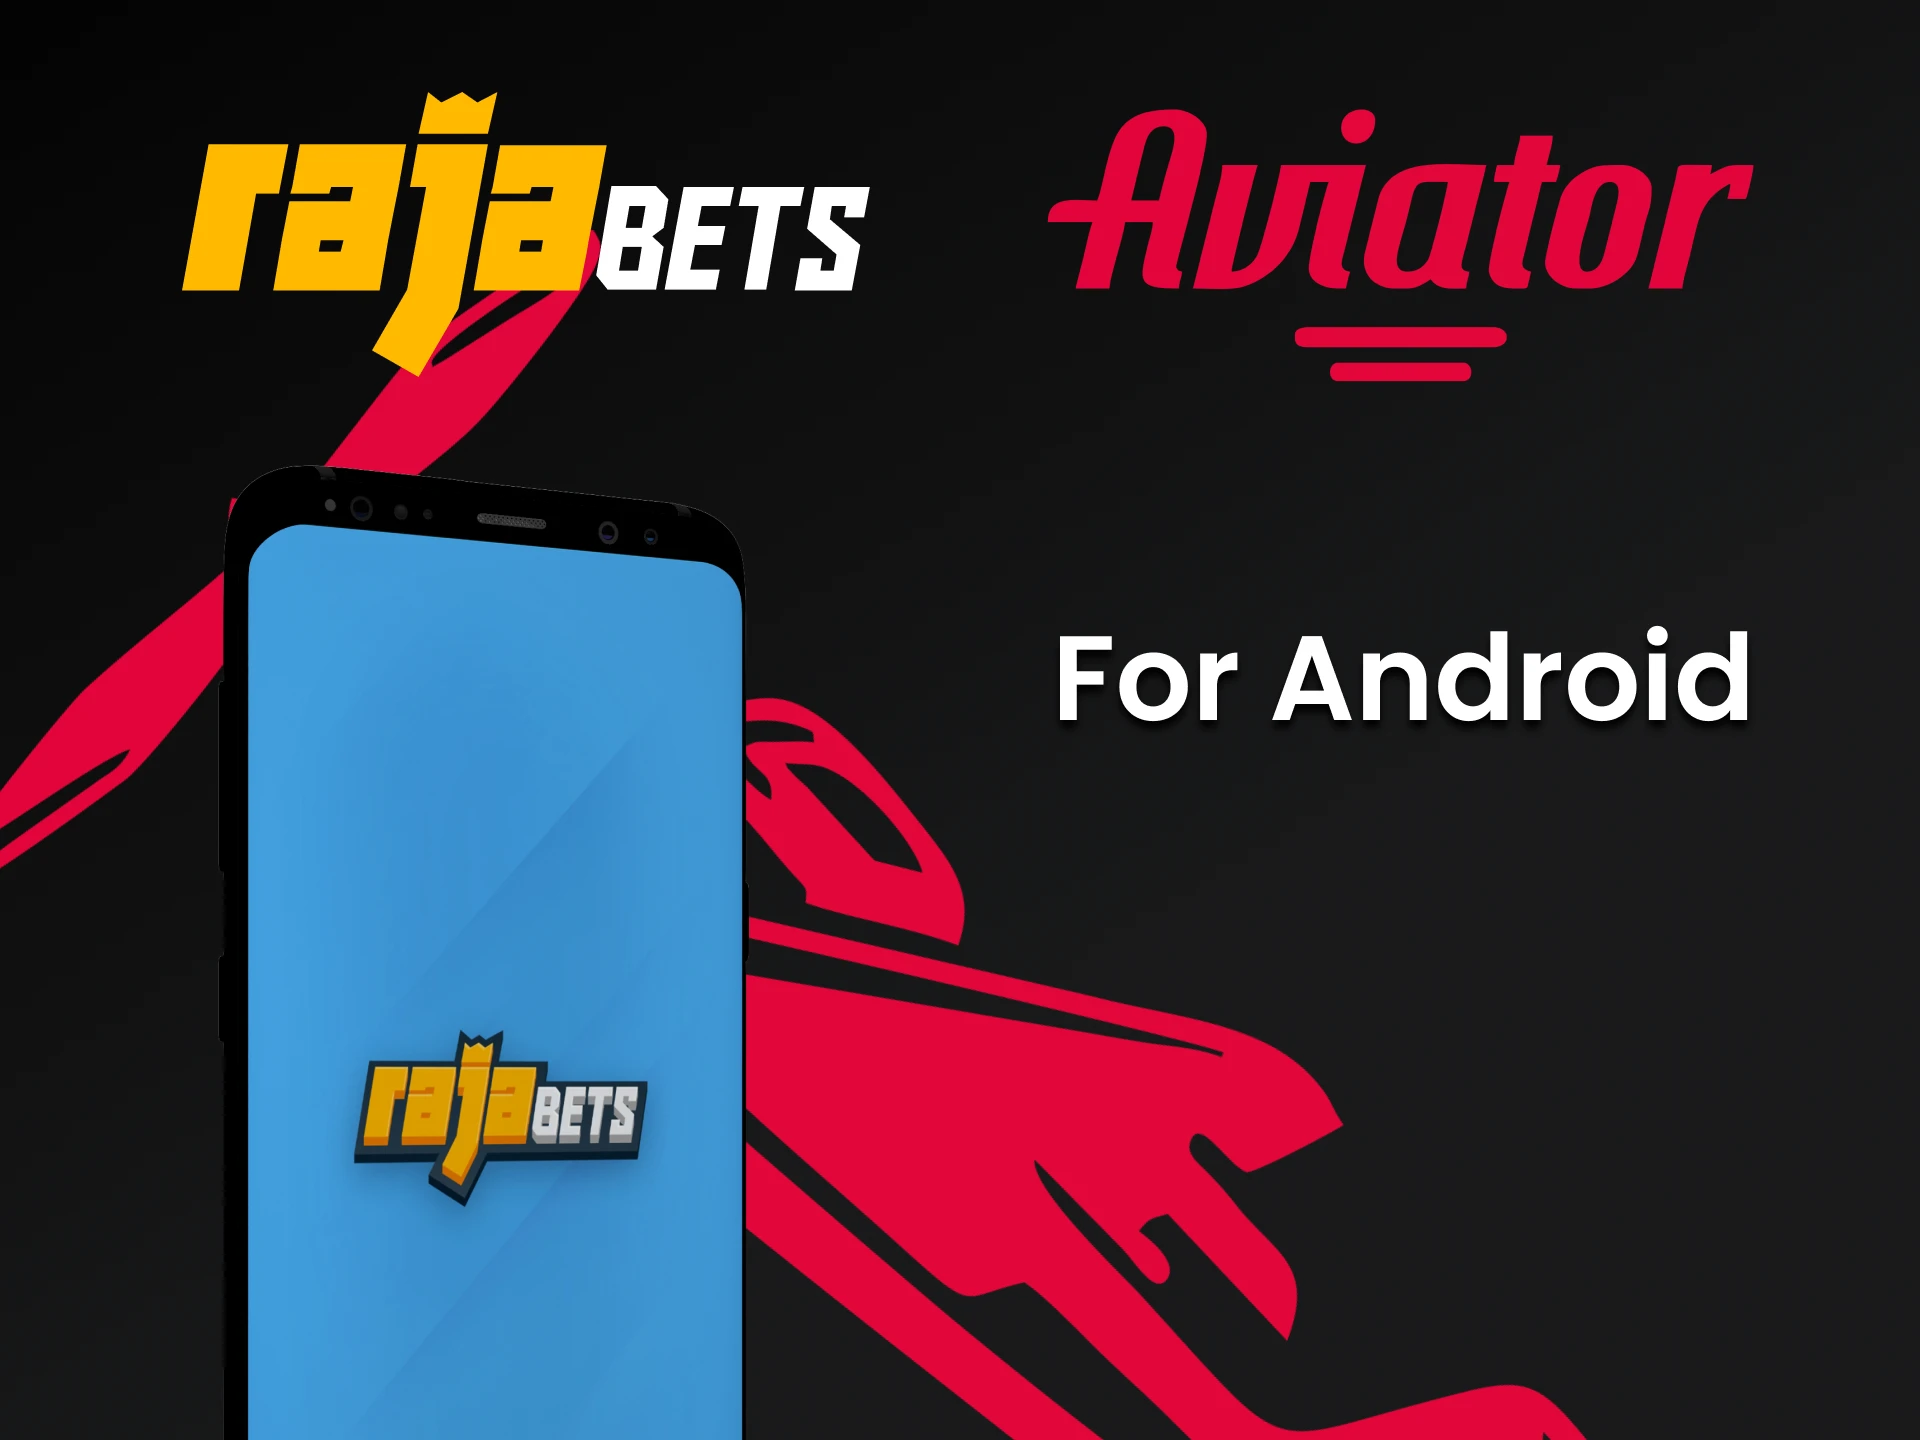 Install the Rajabets Android app to play Aviator.